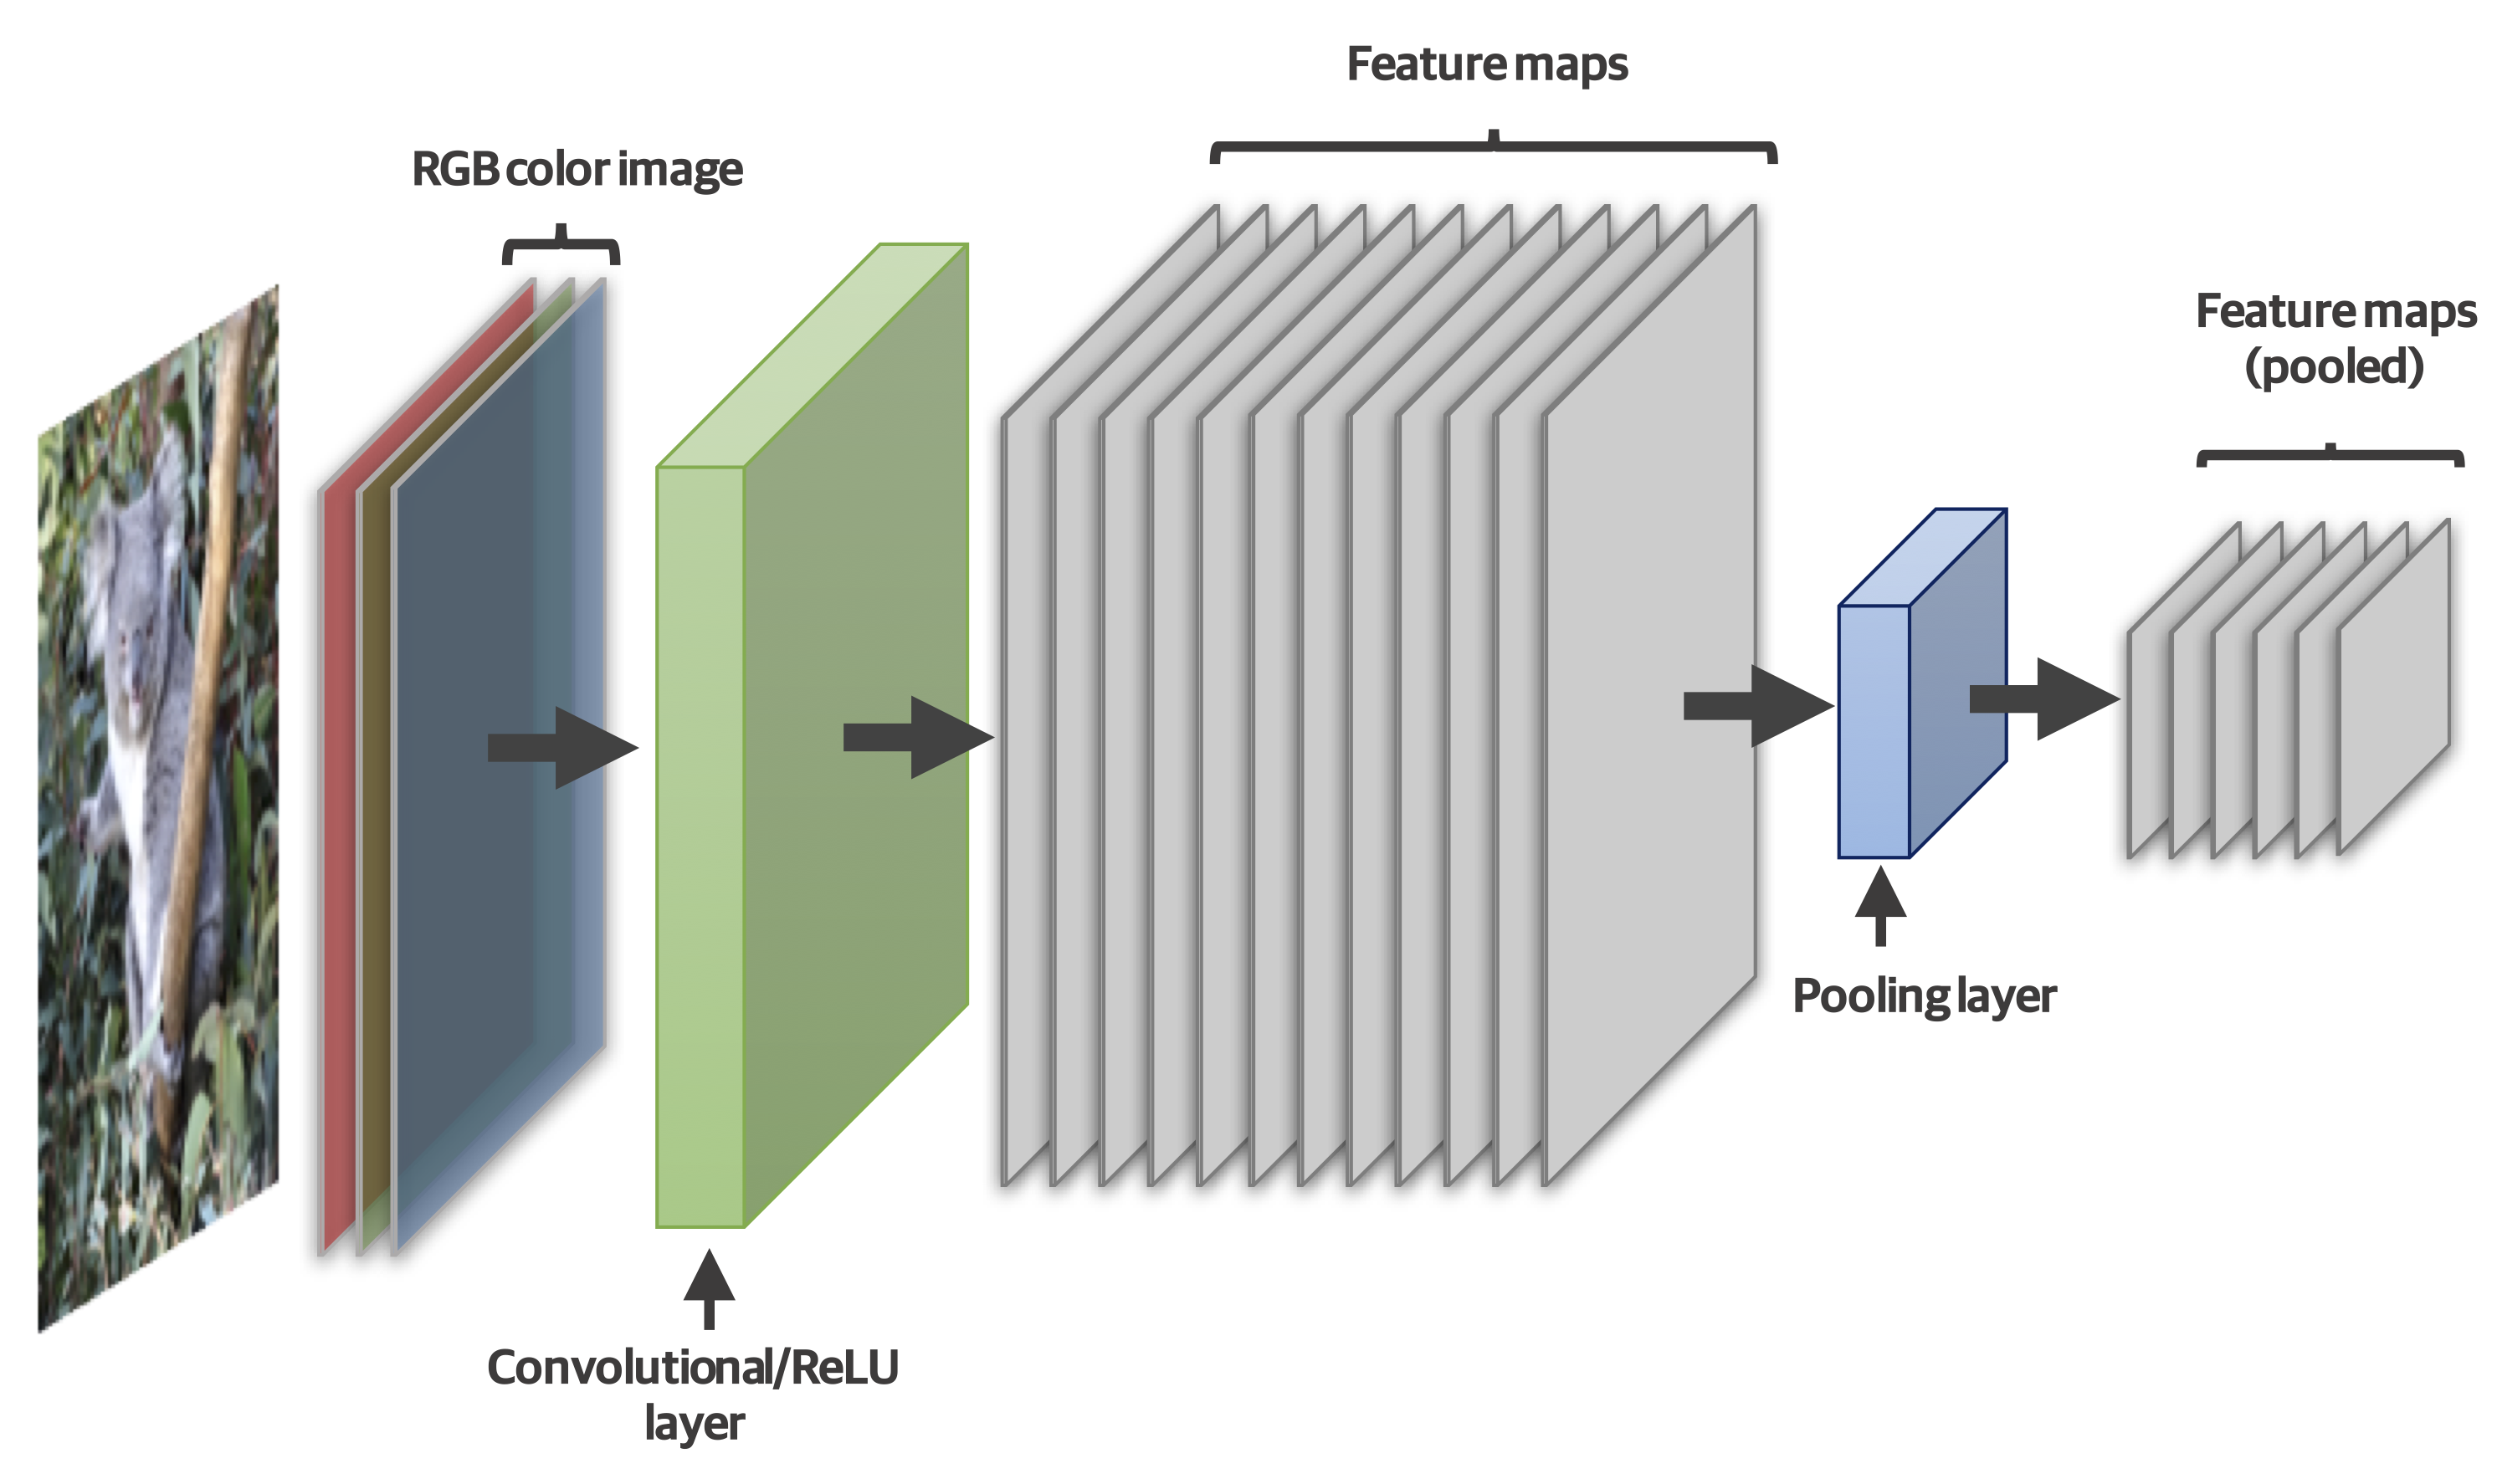 Picture depicting the convolution - ReLU and pooling layers in a CNN